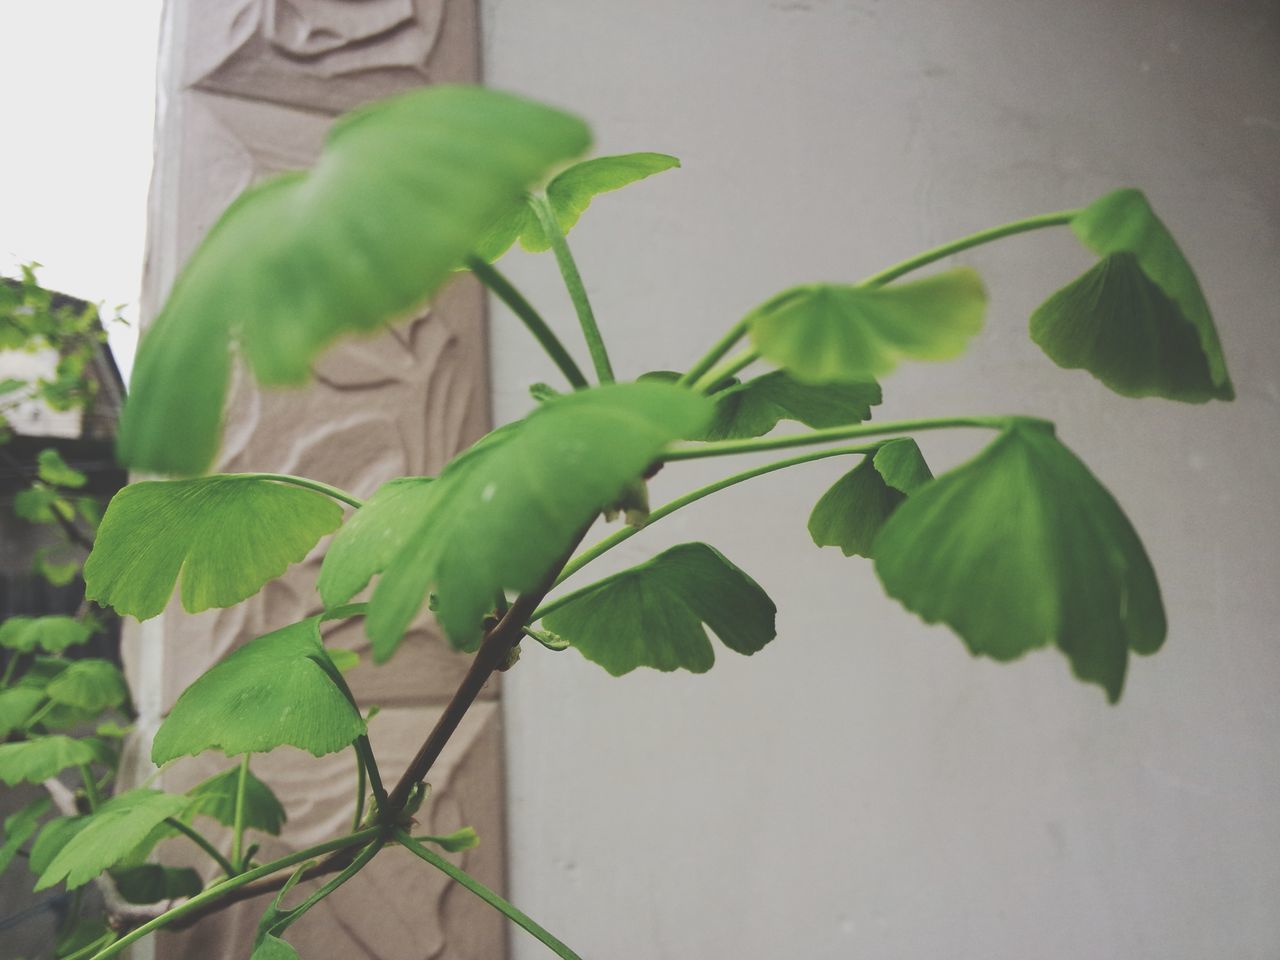 leaf, green color, plant, growth, close-up, potted plant, wall - building feature, stem, green, nature, indoors, growing, focus on foreground, freshness, day, no people, leaf vein, wall, built structure, sunlight